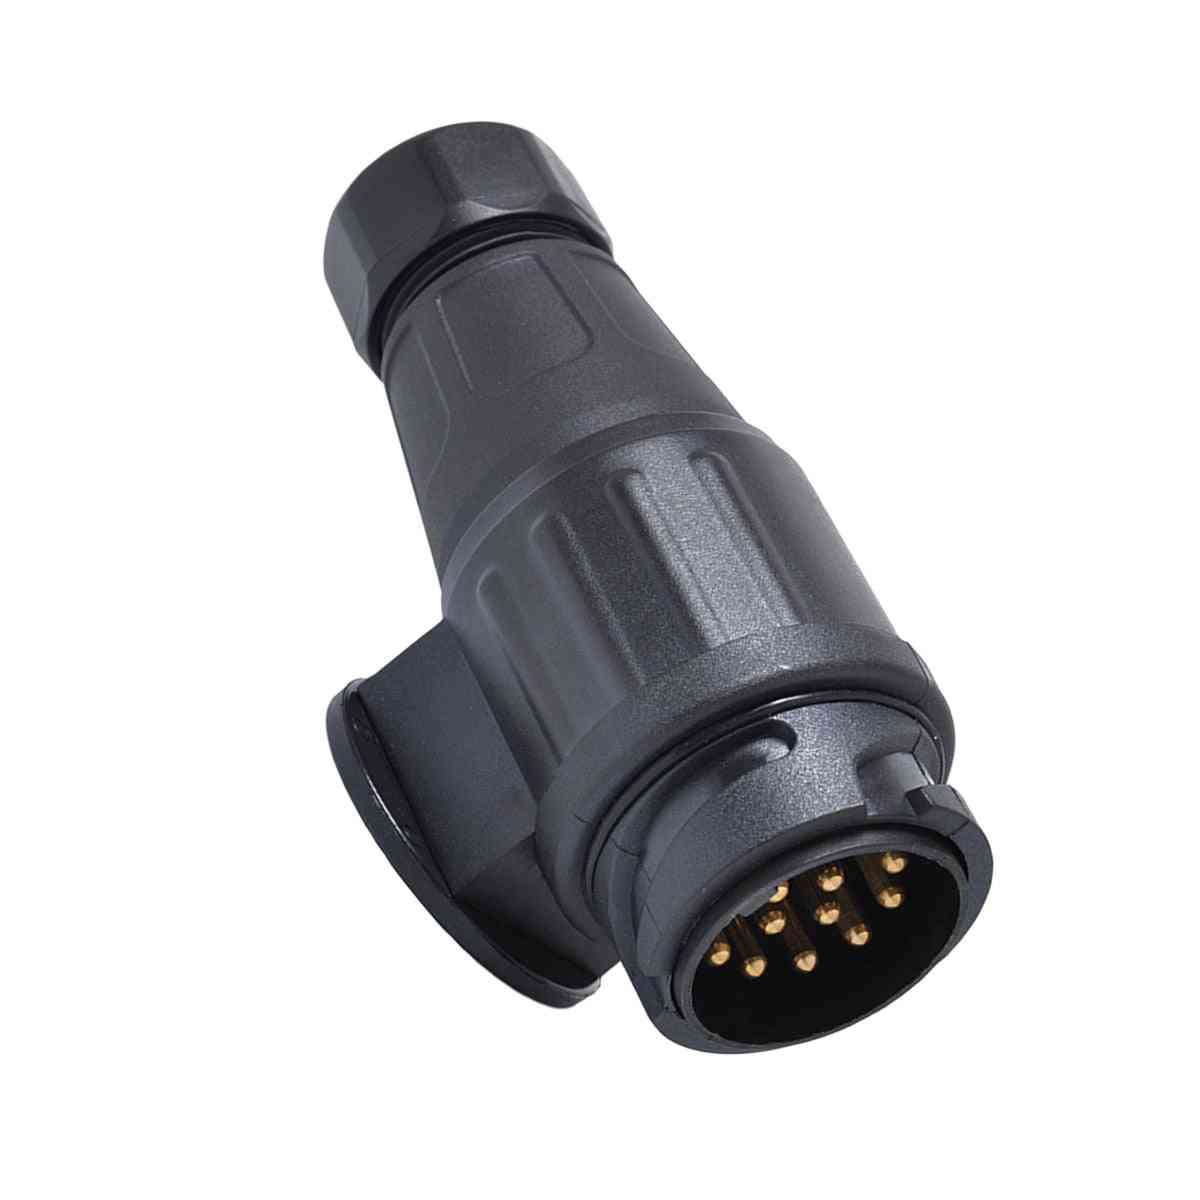 12v, 13 Pin Electrical Waterproof, Wiring Connector Adapter Plug For Vehicle Rv